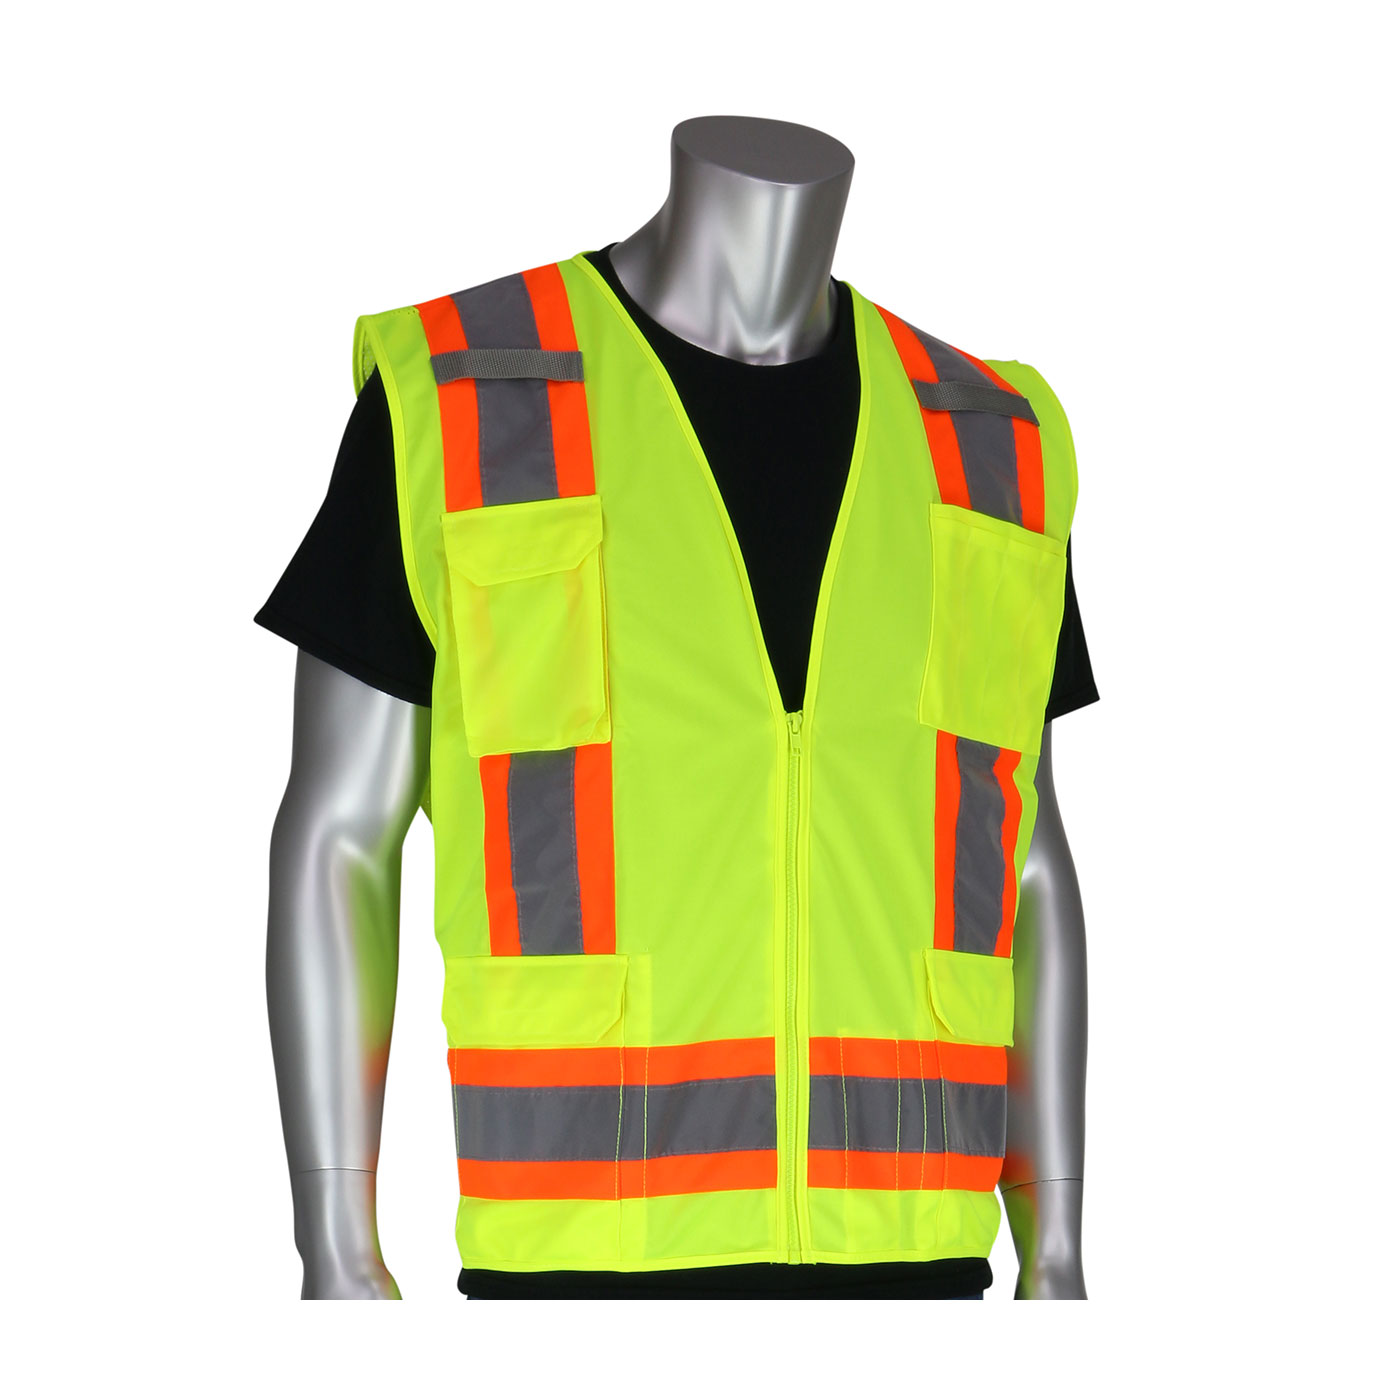 PIP 302-0500-YEL/2X ANSI Type R Class 2 Two-Tone Eleven Pocket Yellow Surveyors Vest with Solid Front and Mesh Back - 2X-Large PID-302 0500YEL 2X